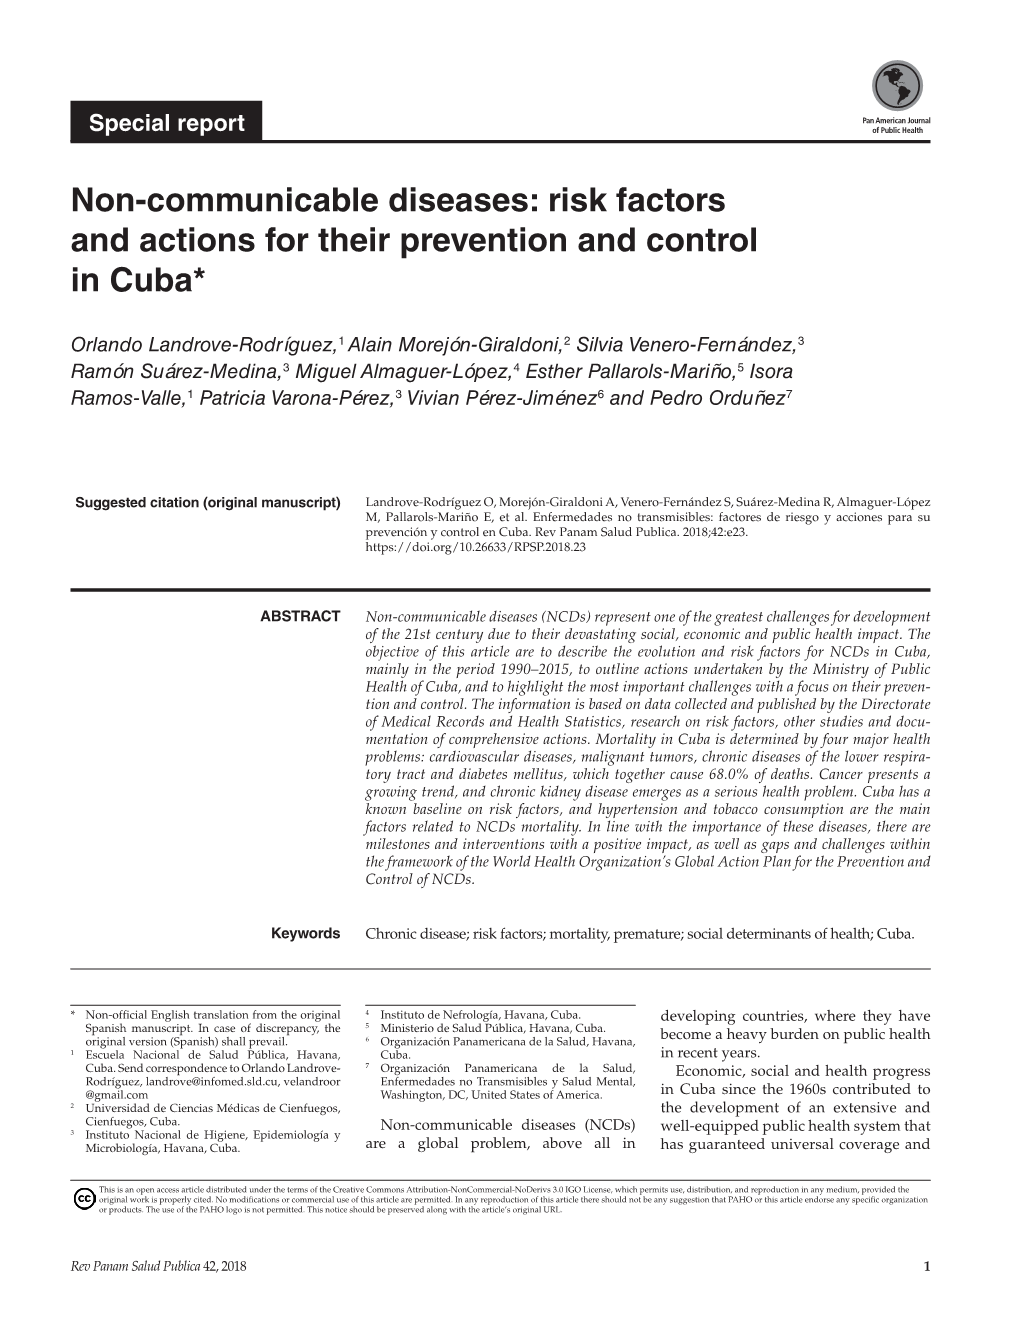 Non-Communicable Diseases: Risk Factors and Actions for Their Prevention and Control in Cuba*